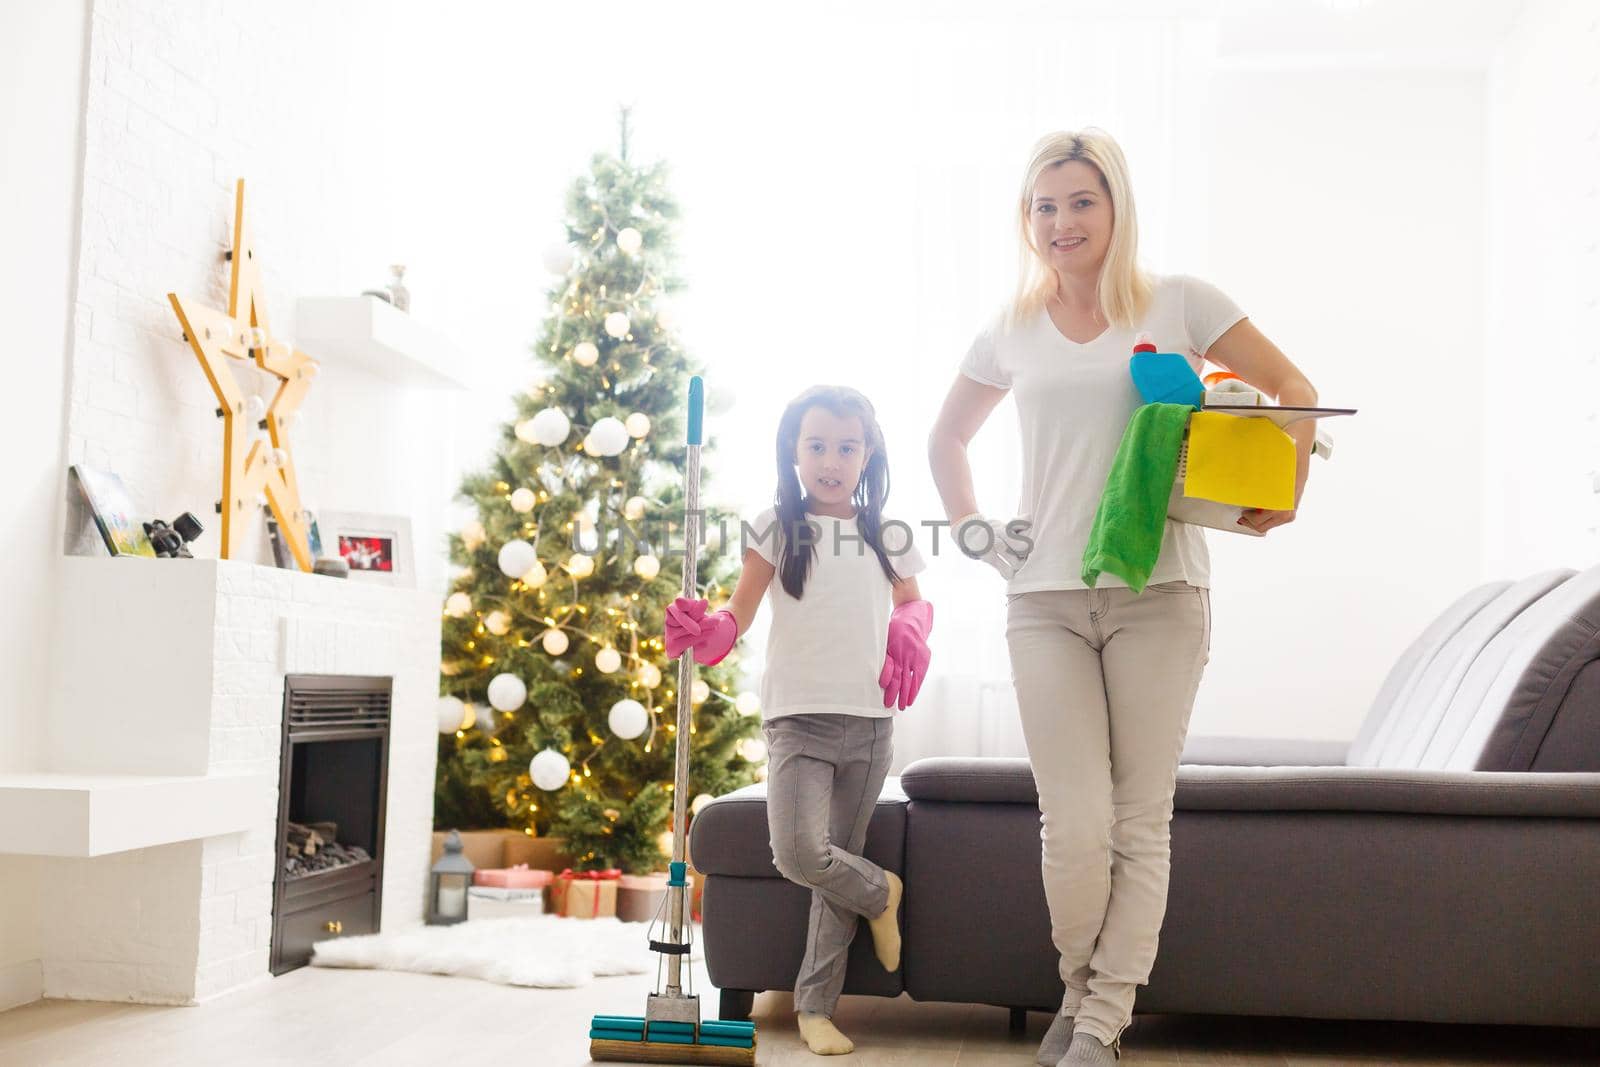 daughter and mother preparation for celebration of New Year